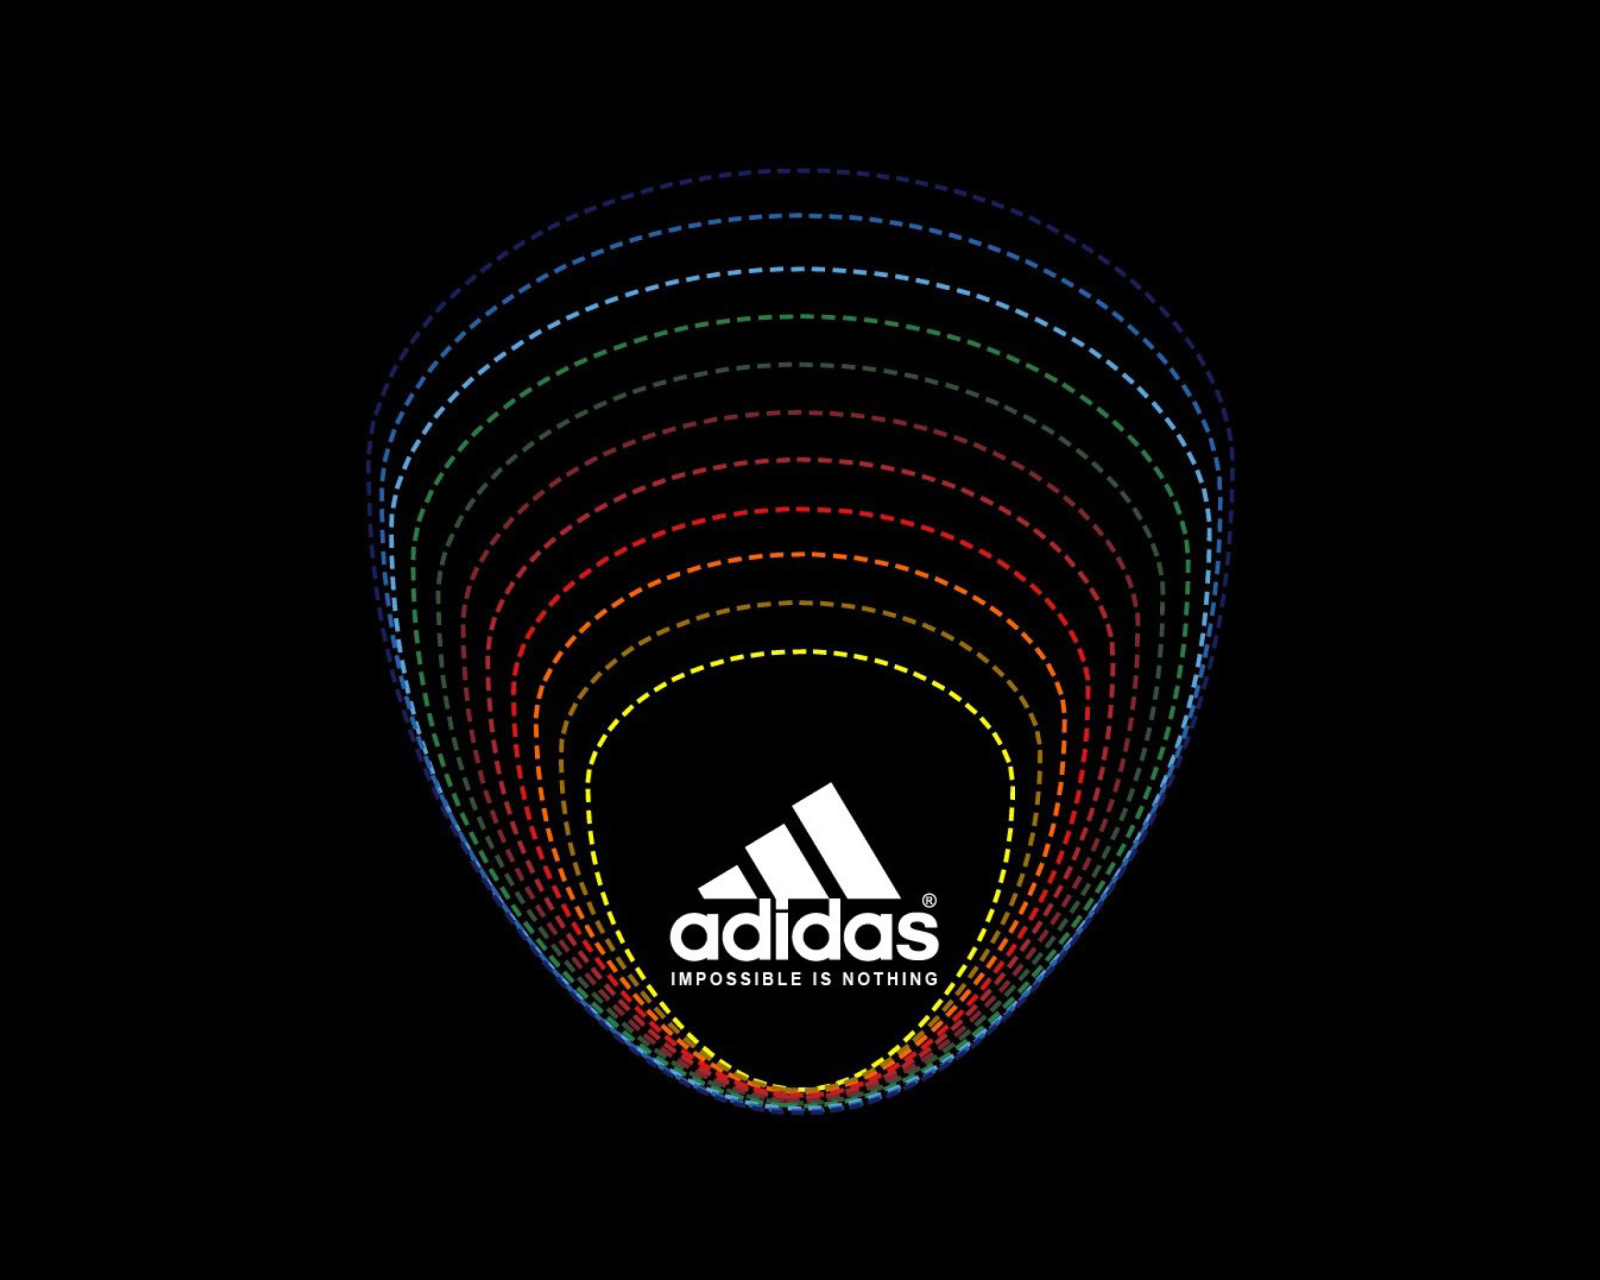 Das Adidas Tagline, Impossible is Nothing Wallpaper 1600x1280